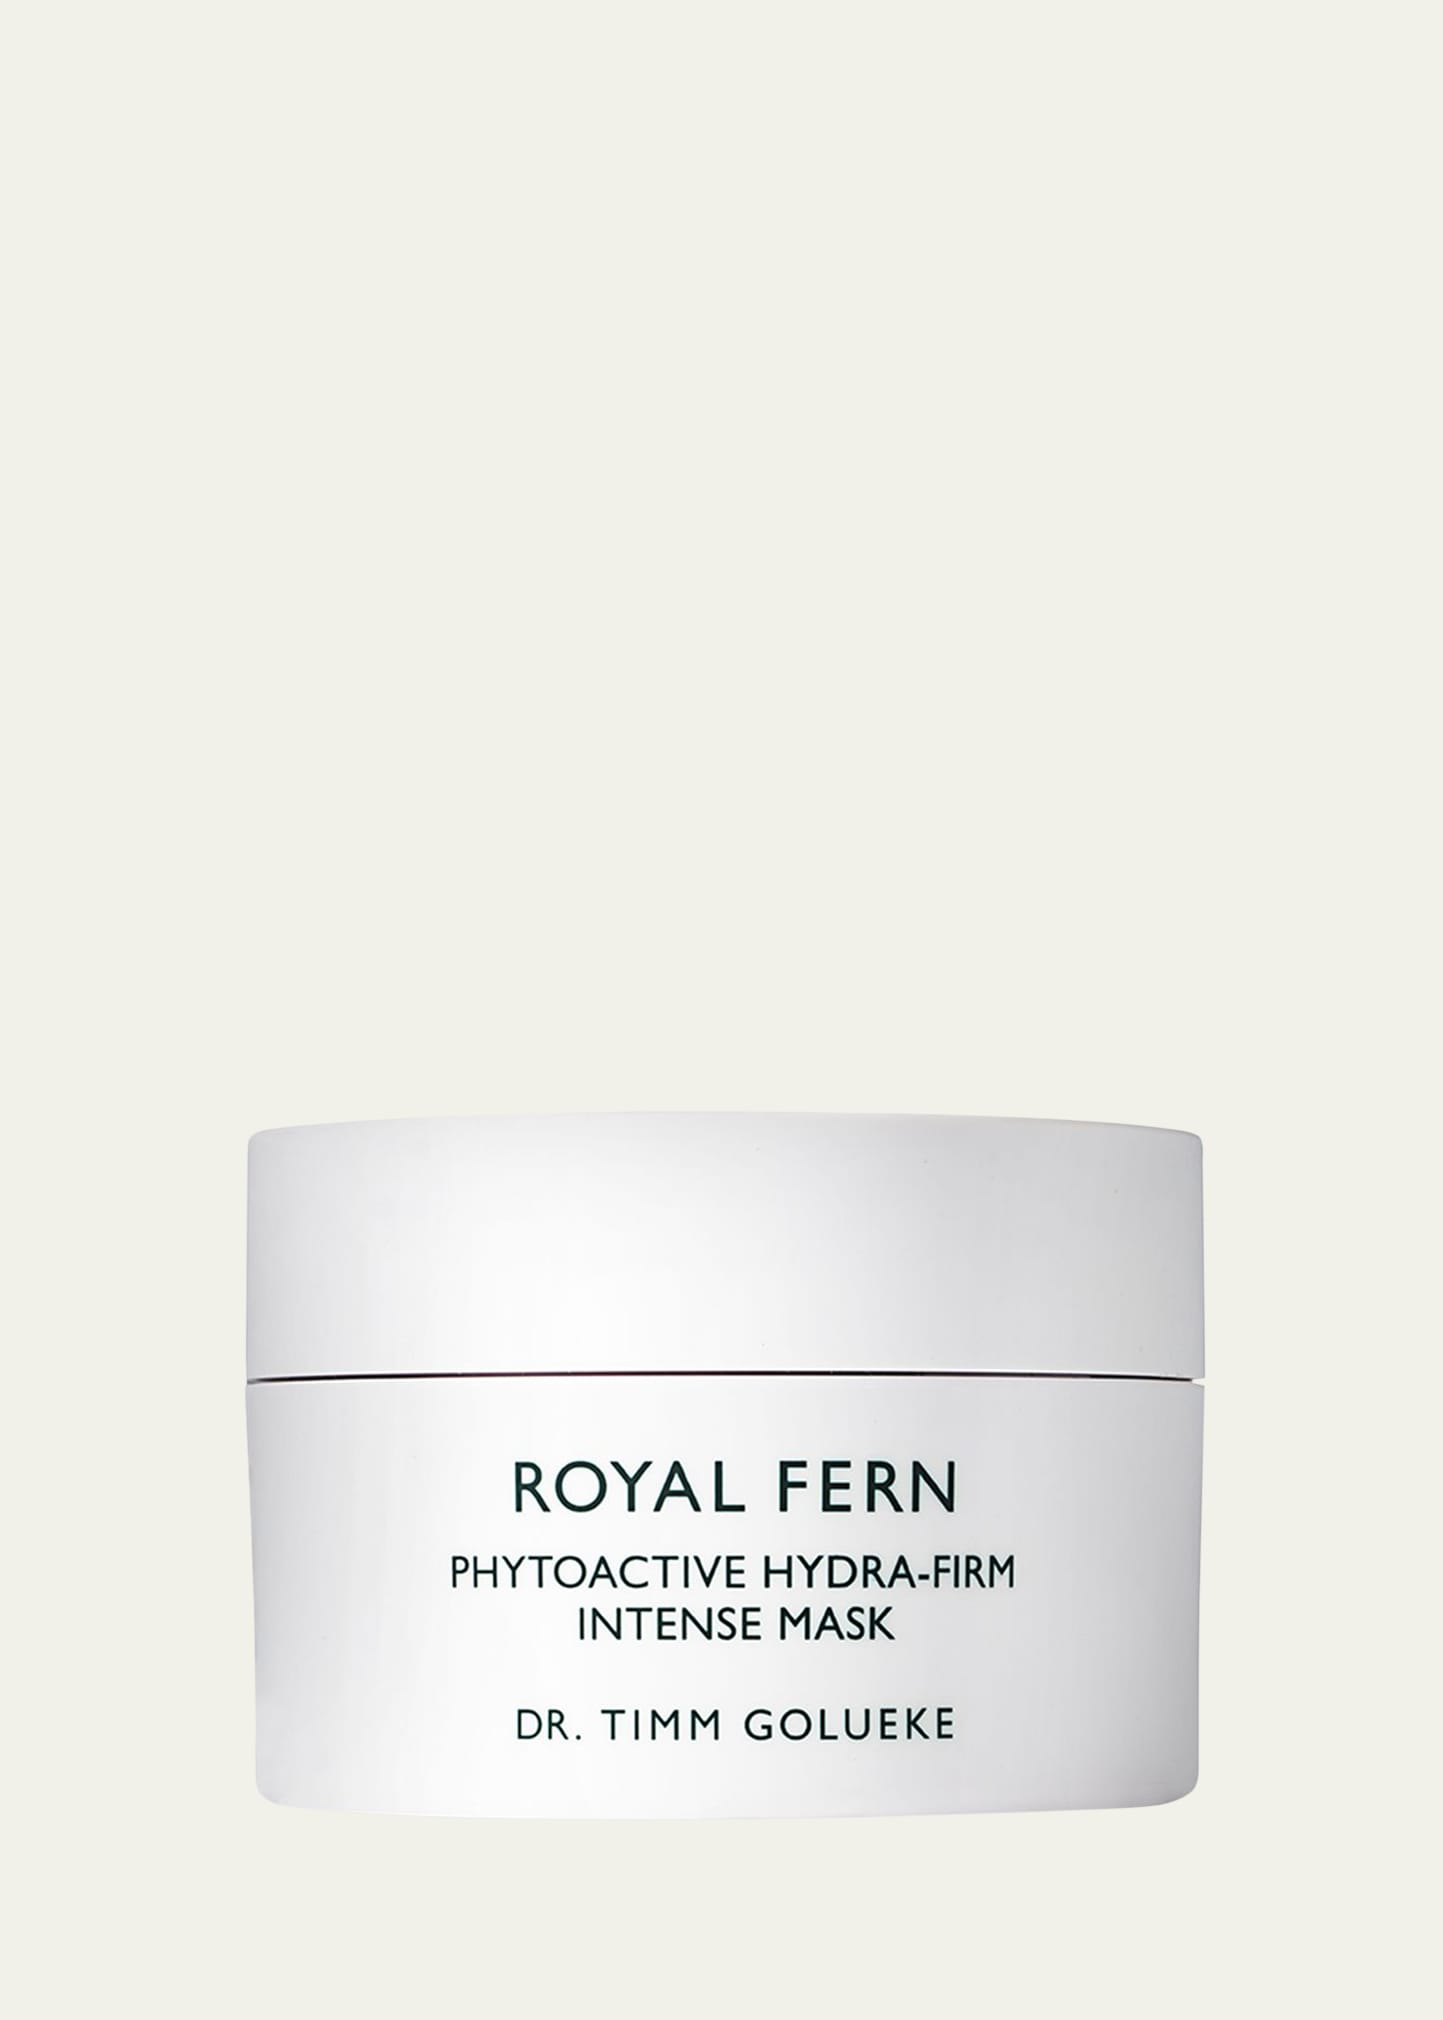 Phytoactive Hydra-Firm Intense Mask, 1.7 oz.